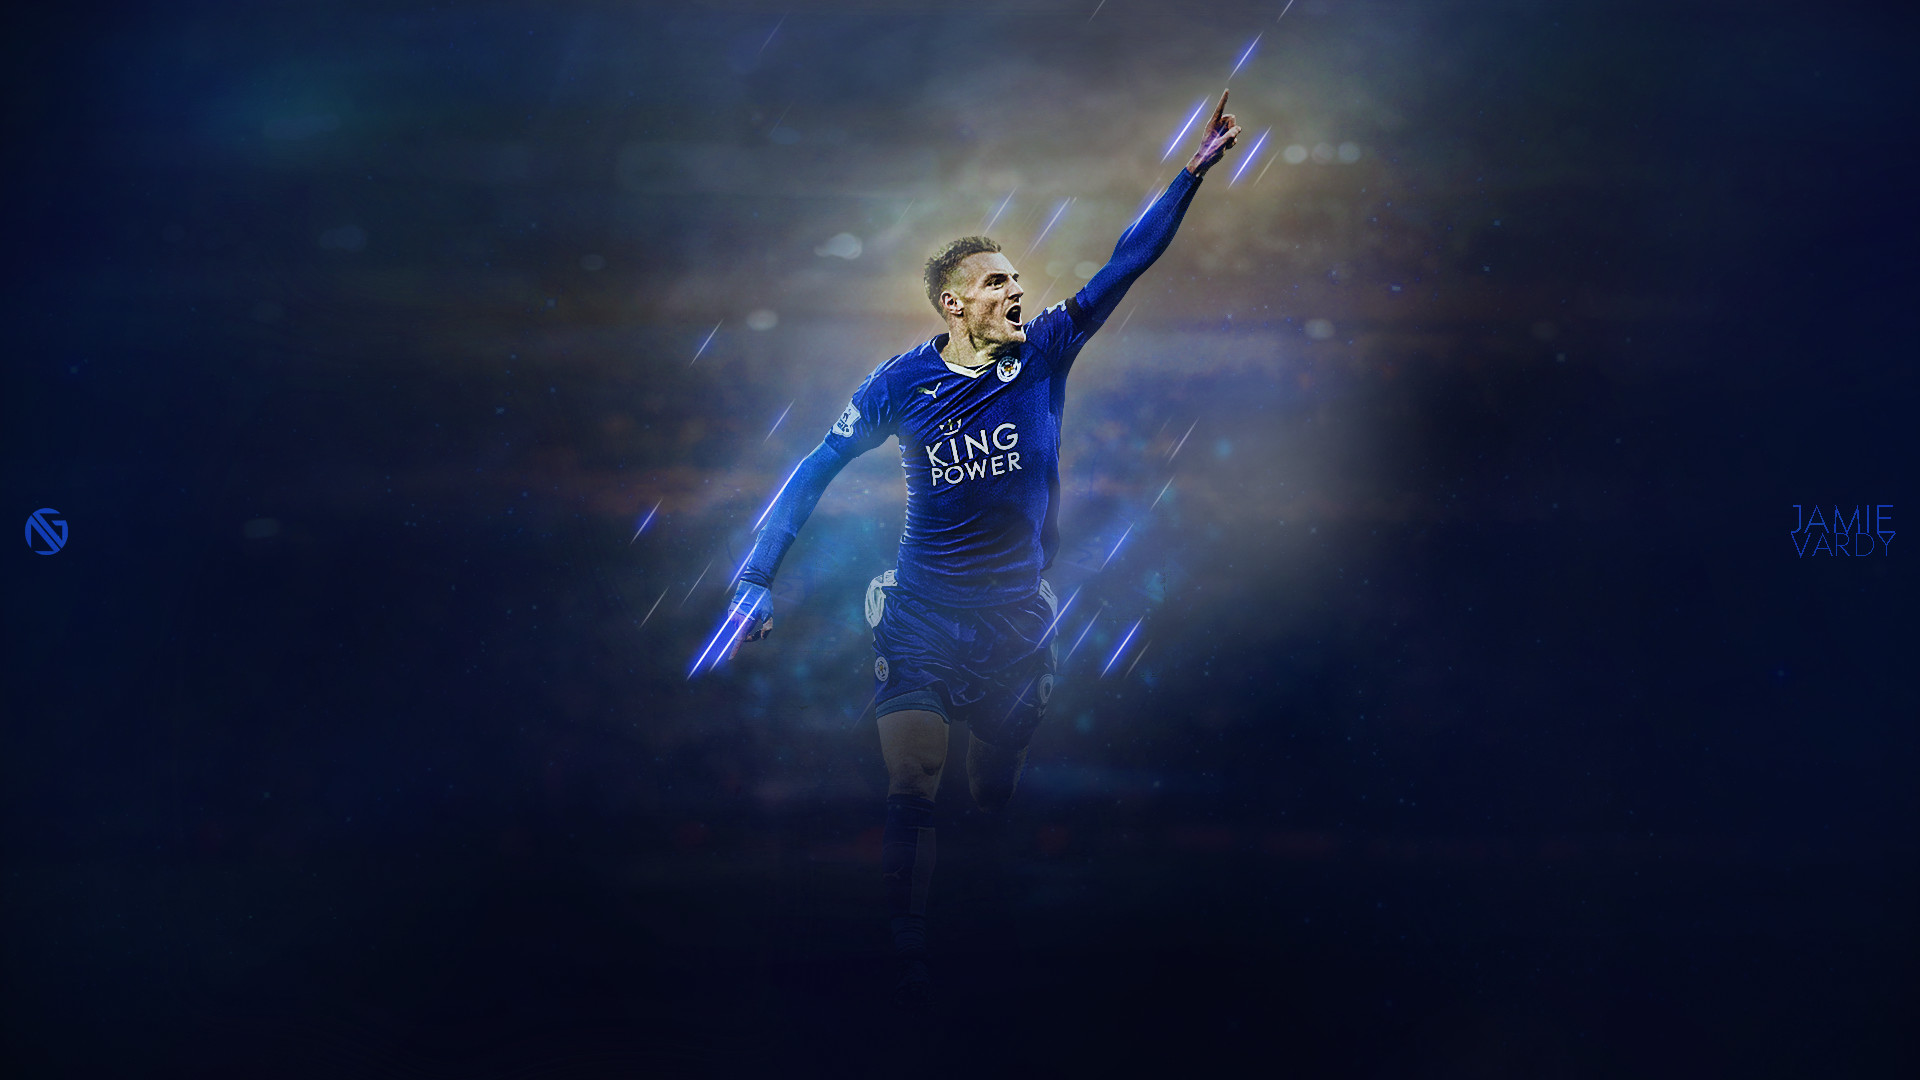 1920x1080 Jamie Vardy Wallpaper by dreamgraphicss Jamie Vardy Wallpaper by  dreamgraphicss